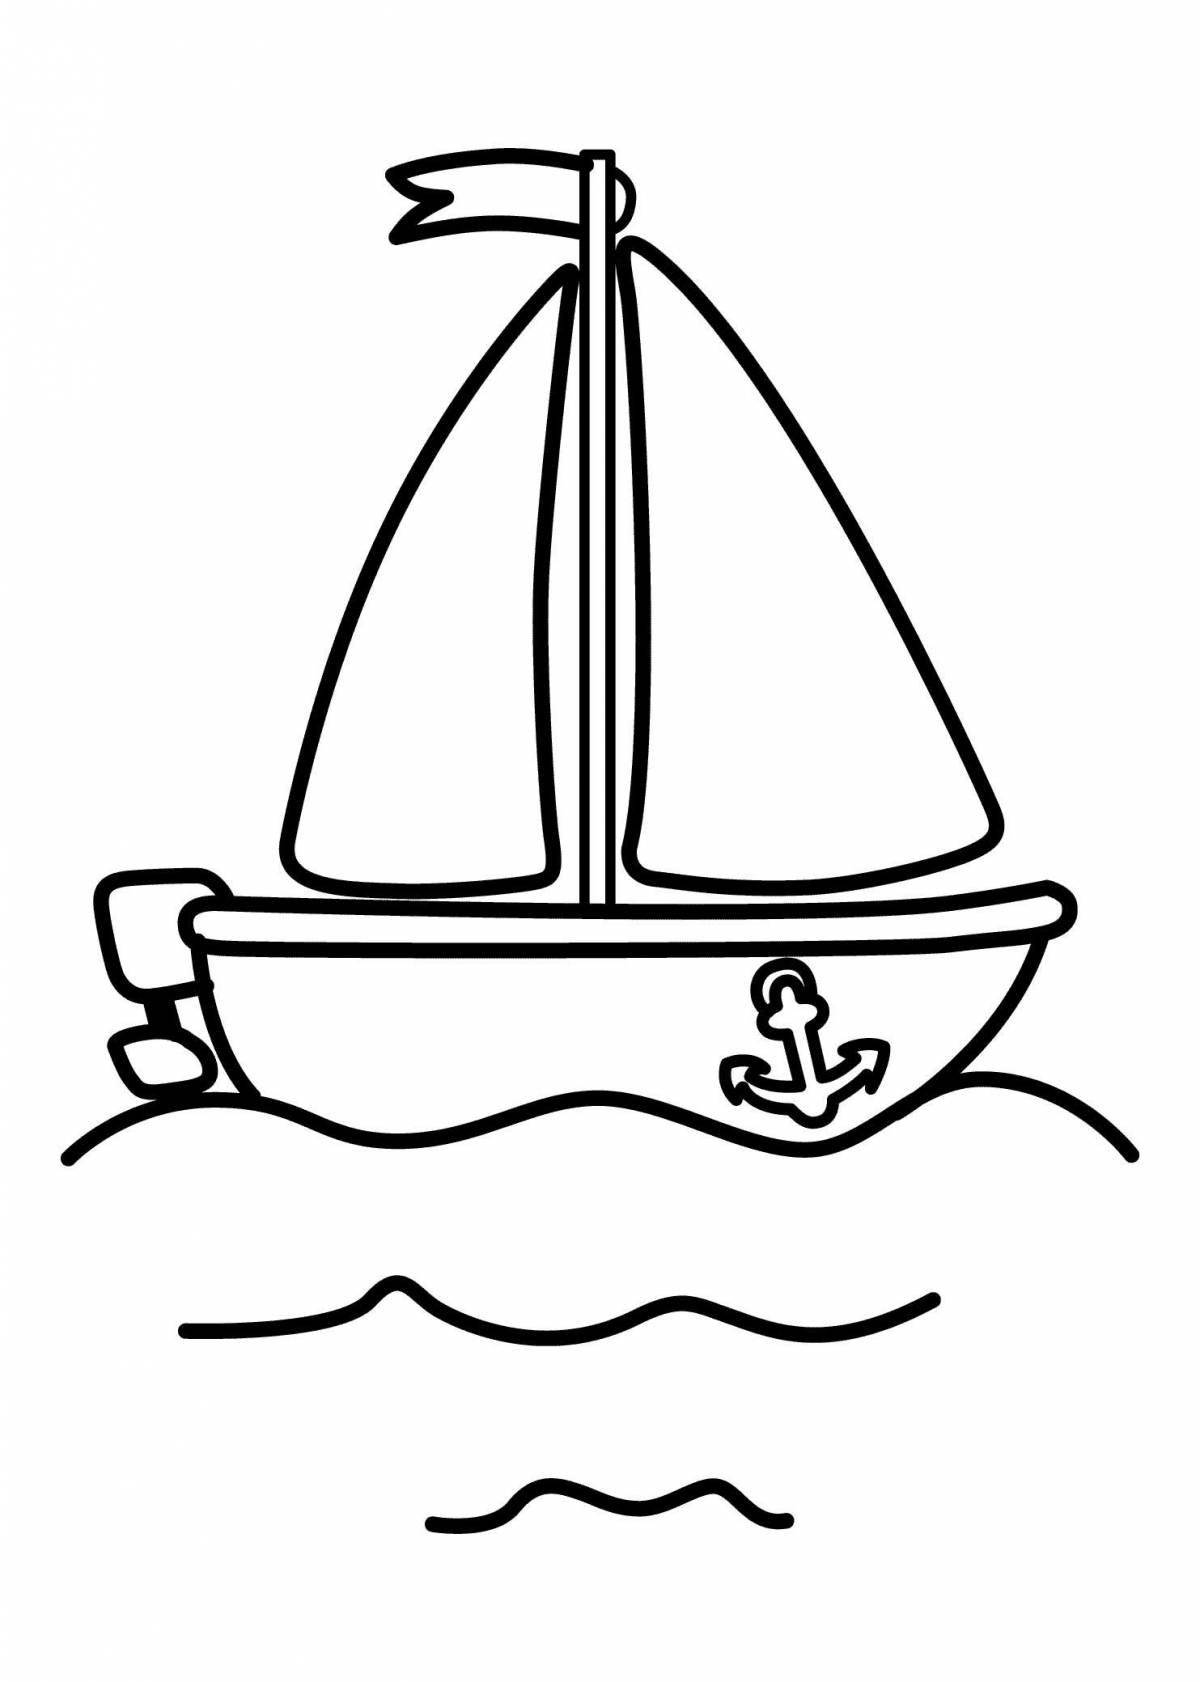 Great yacht coloring book for students